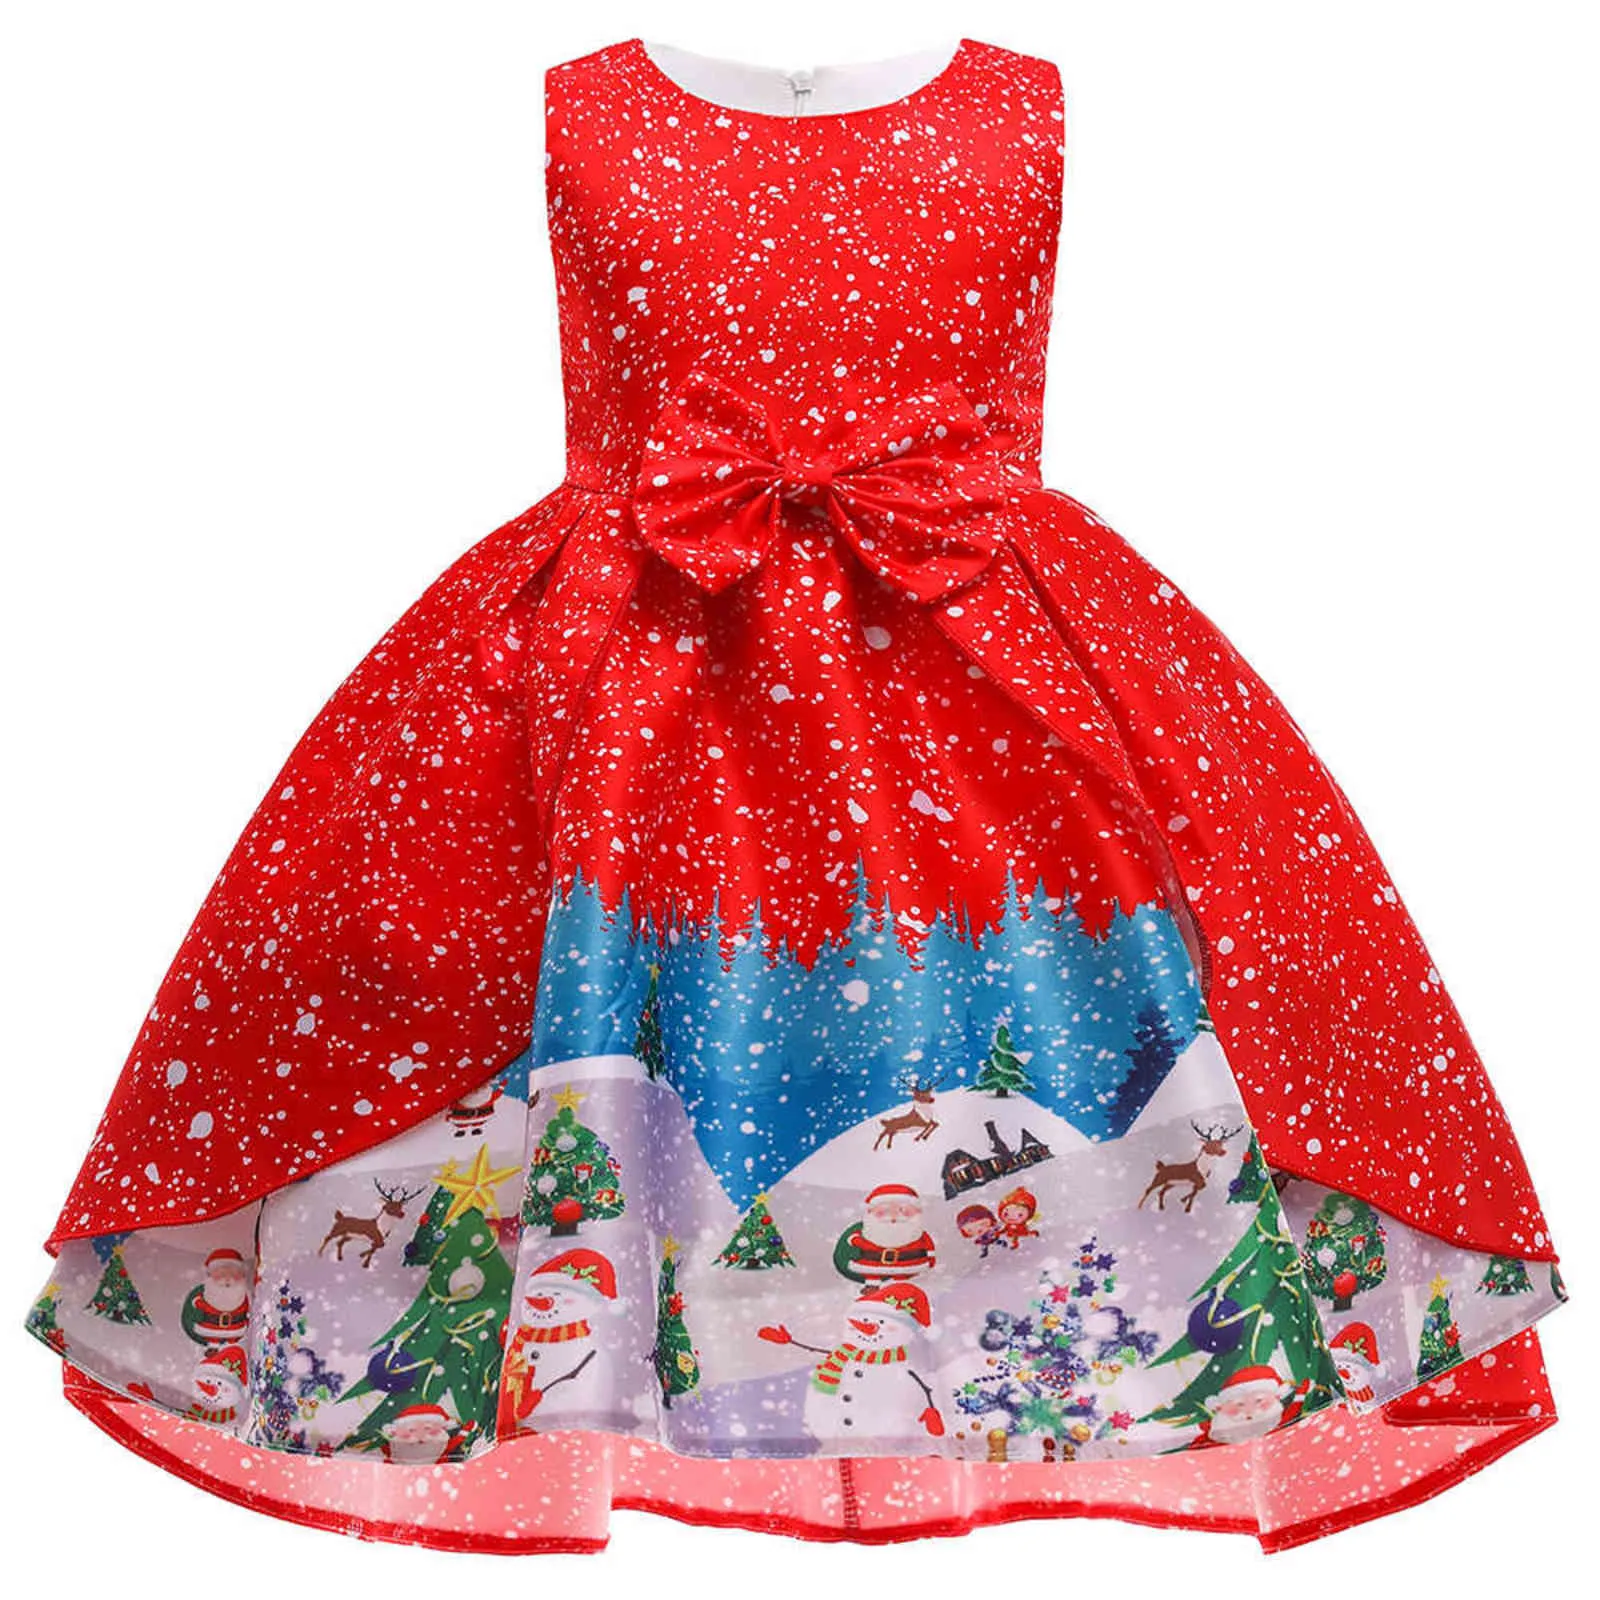 Christmas Dress For Kids Girl Print Santa Claus Princess Dresses New Year Baby Girls Party Dress Children Cosplay Costume 3-10Y G1129